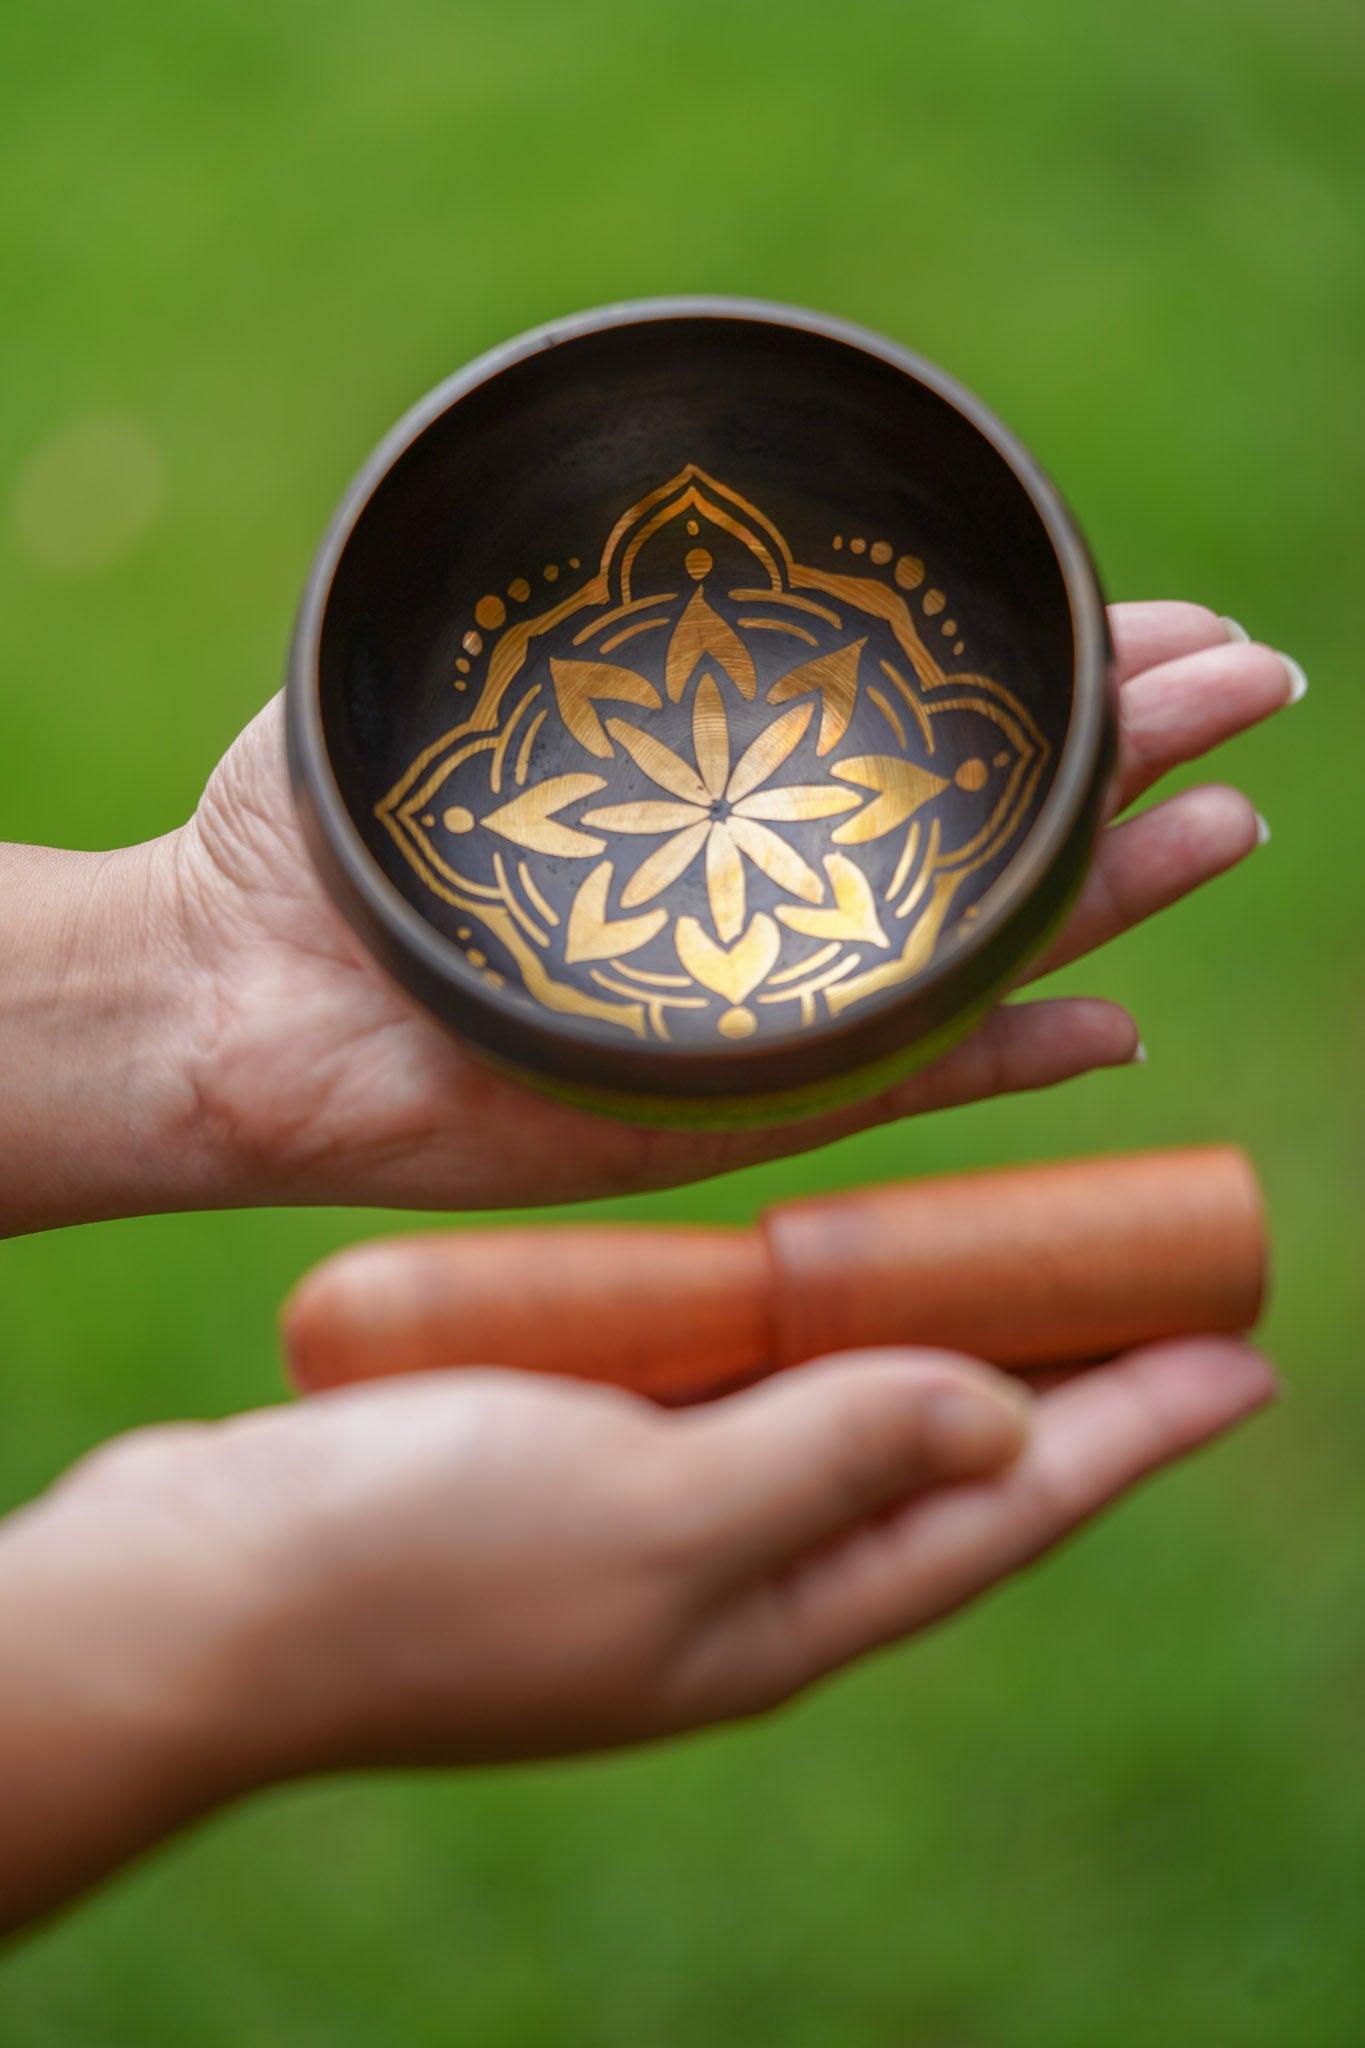 A complete package includes: 1. A 4.5 inch Singing Bowl 2. A resting cushion 3. 1 x wooden stick  Why it is must buy? 1. Elevates of life force. 2. Balance the mind 3. Promotes energy balance in the body. 4. Enhance creativity and focus.